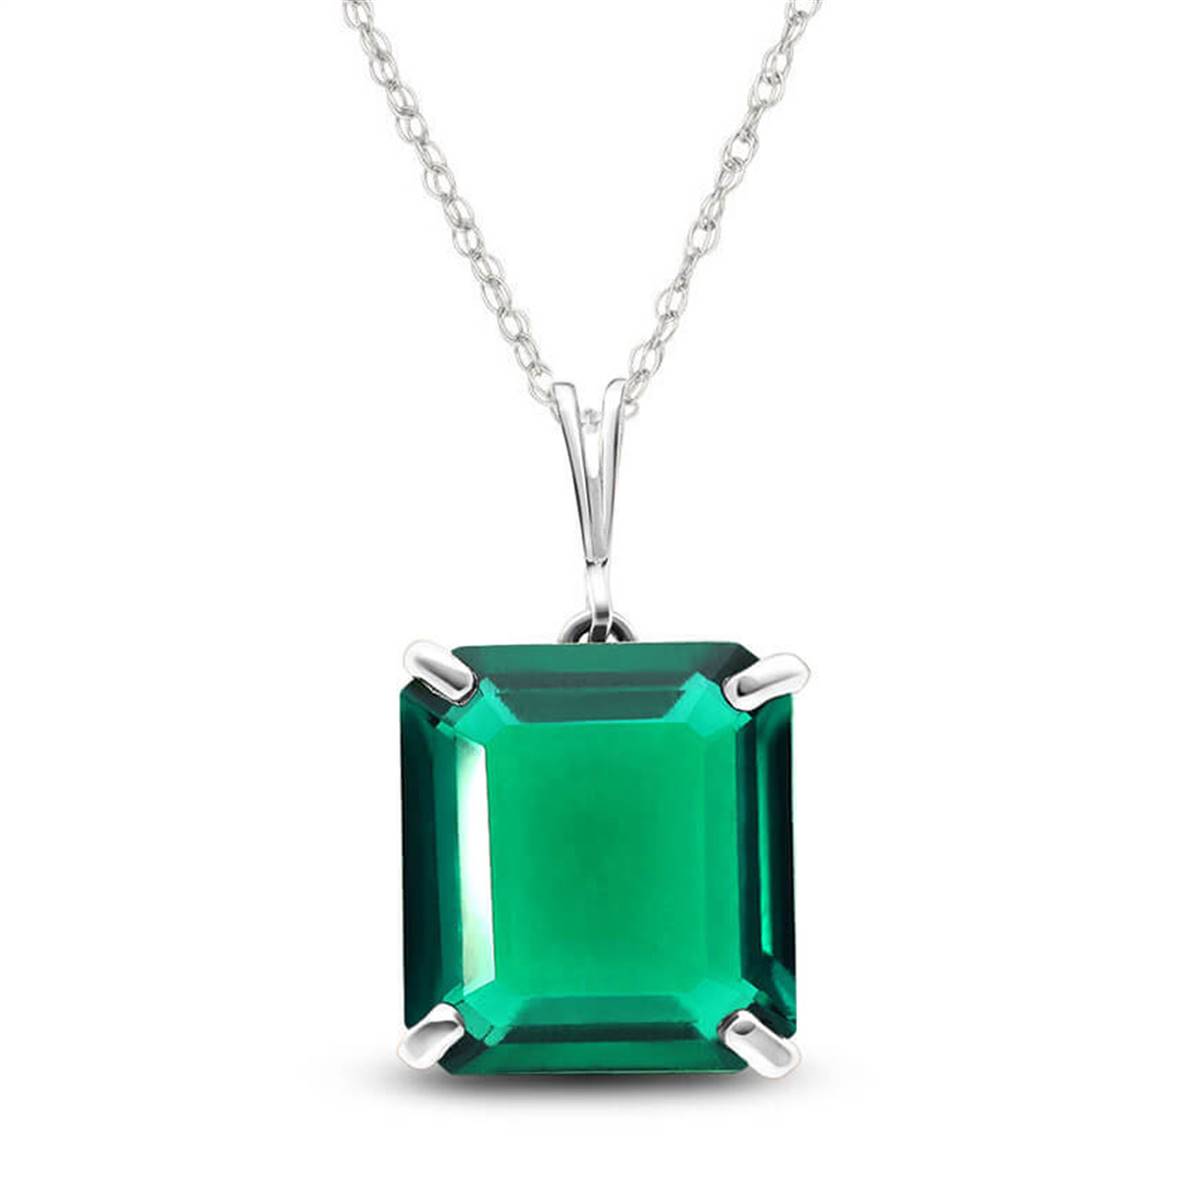 14K Solid White Gold Necklace With Octagon Shape 4.5 ctw High Polished Genuine Emerald - Grade AAA